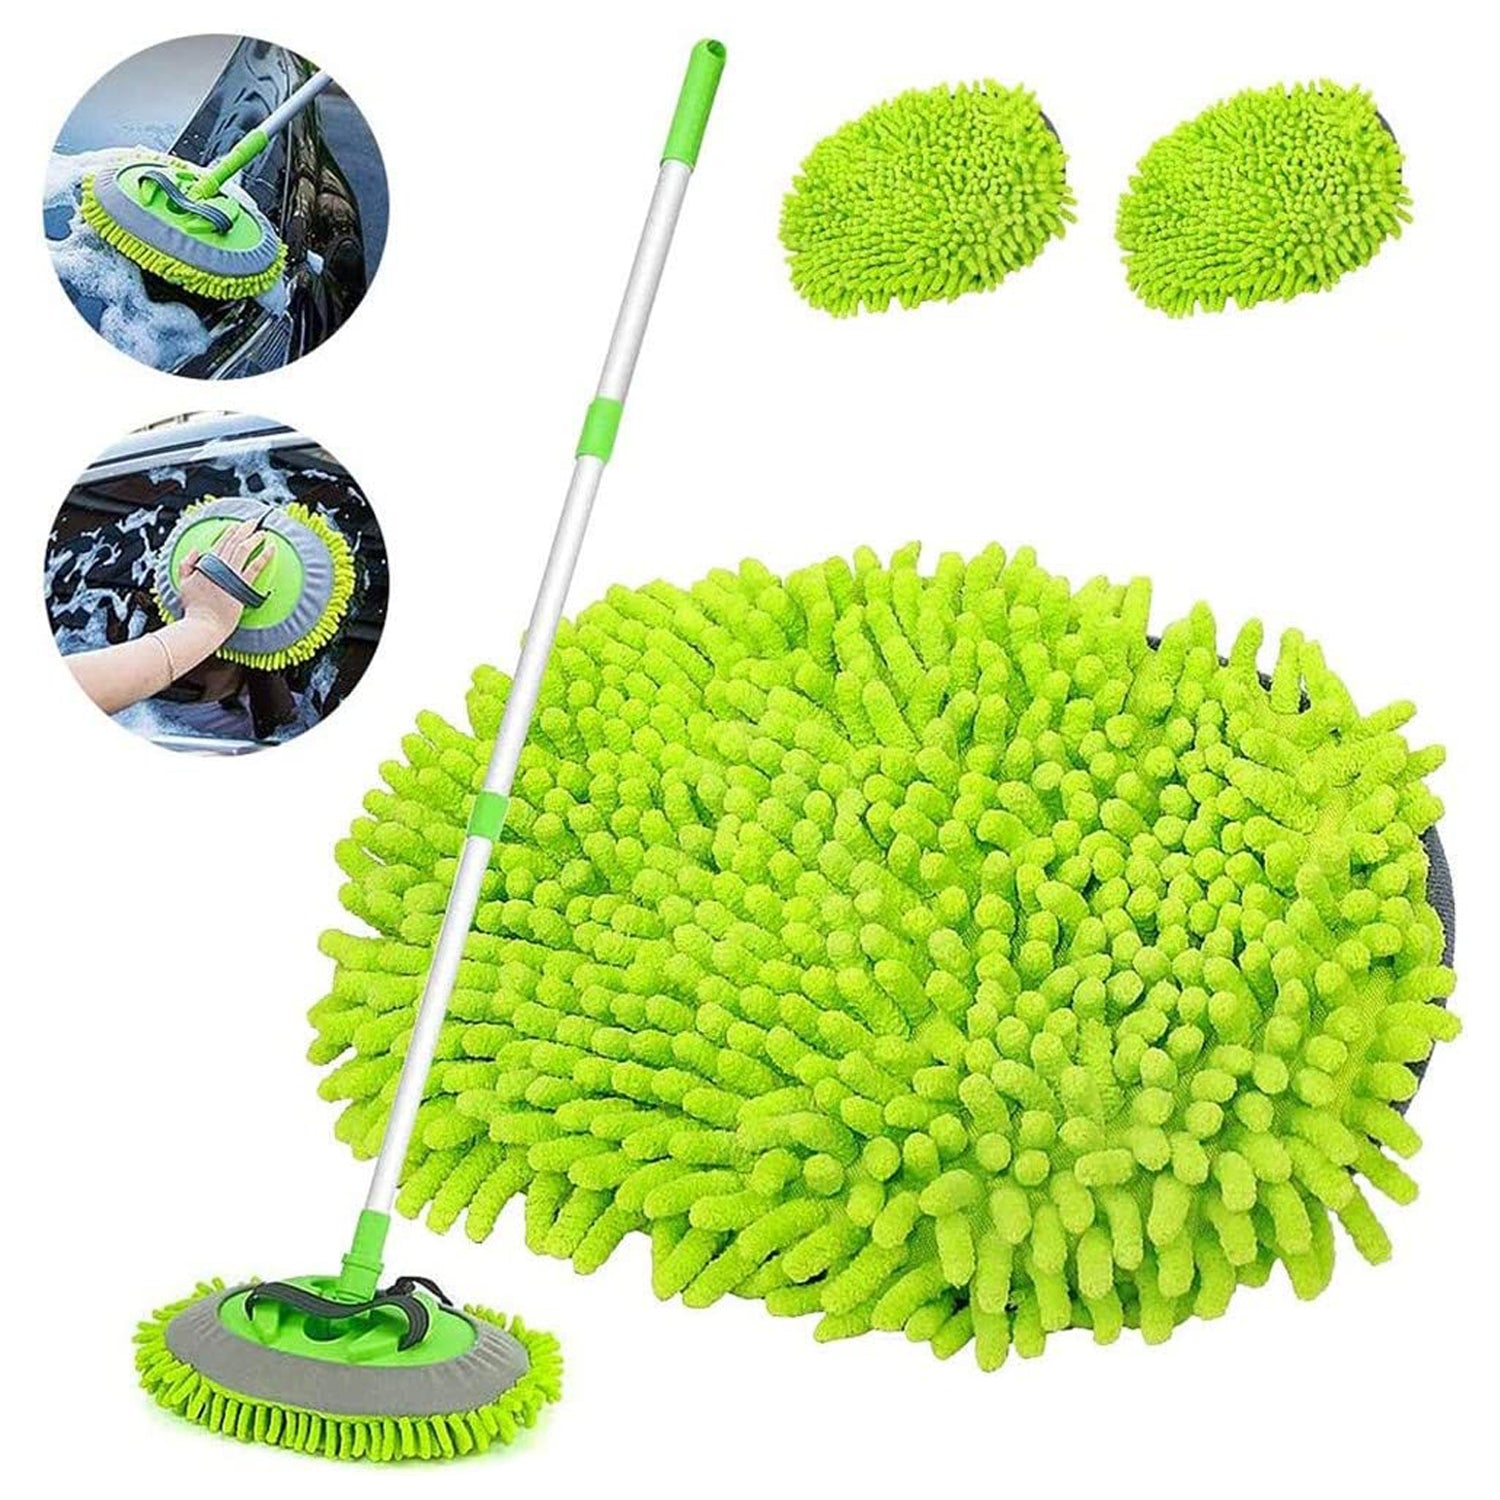 4987 Car Duster Microfiber Flexible Duster Car Wash | Car Cleaning Accessories | Microfiber | brush | Dry/Wet Home, Kitchen, Office Cleaning Brush Extendable Handle DeoDap